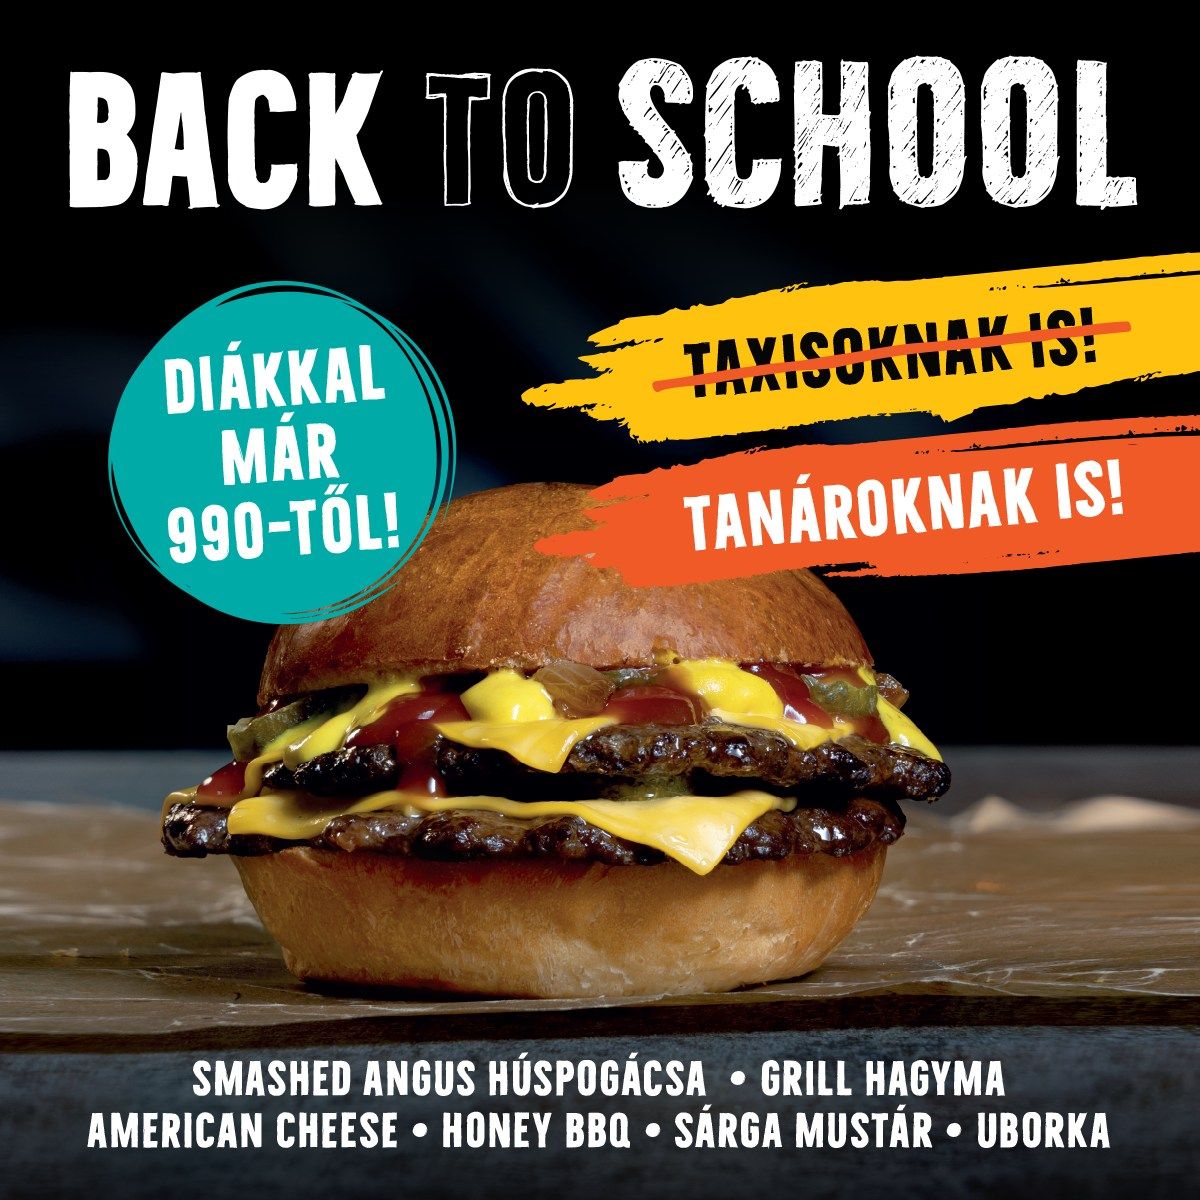 Back to School hamburger: Zing offers good prices for students and teachers - Zsozeatya also joined the party